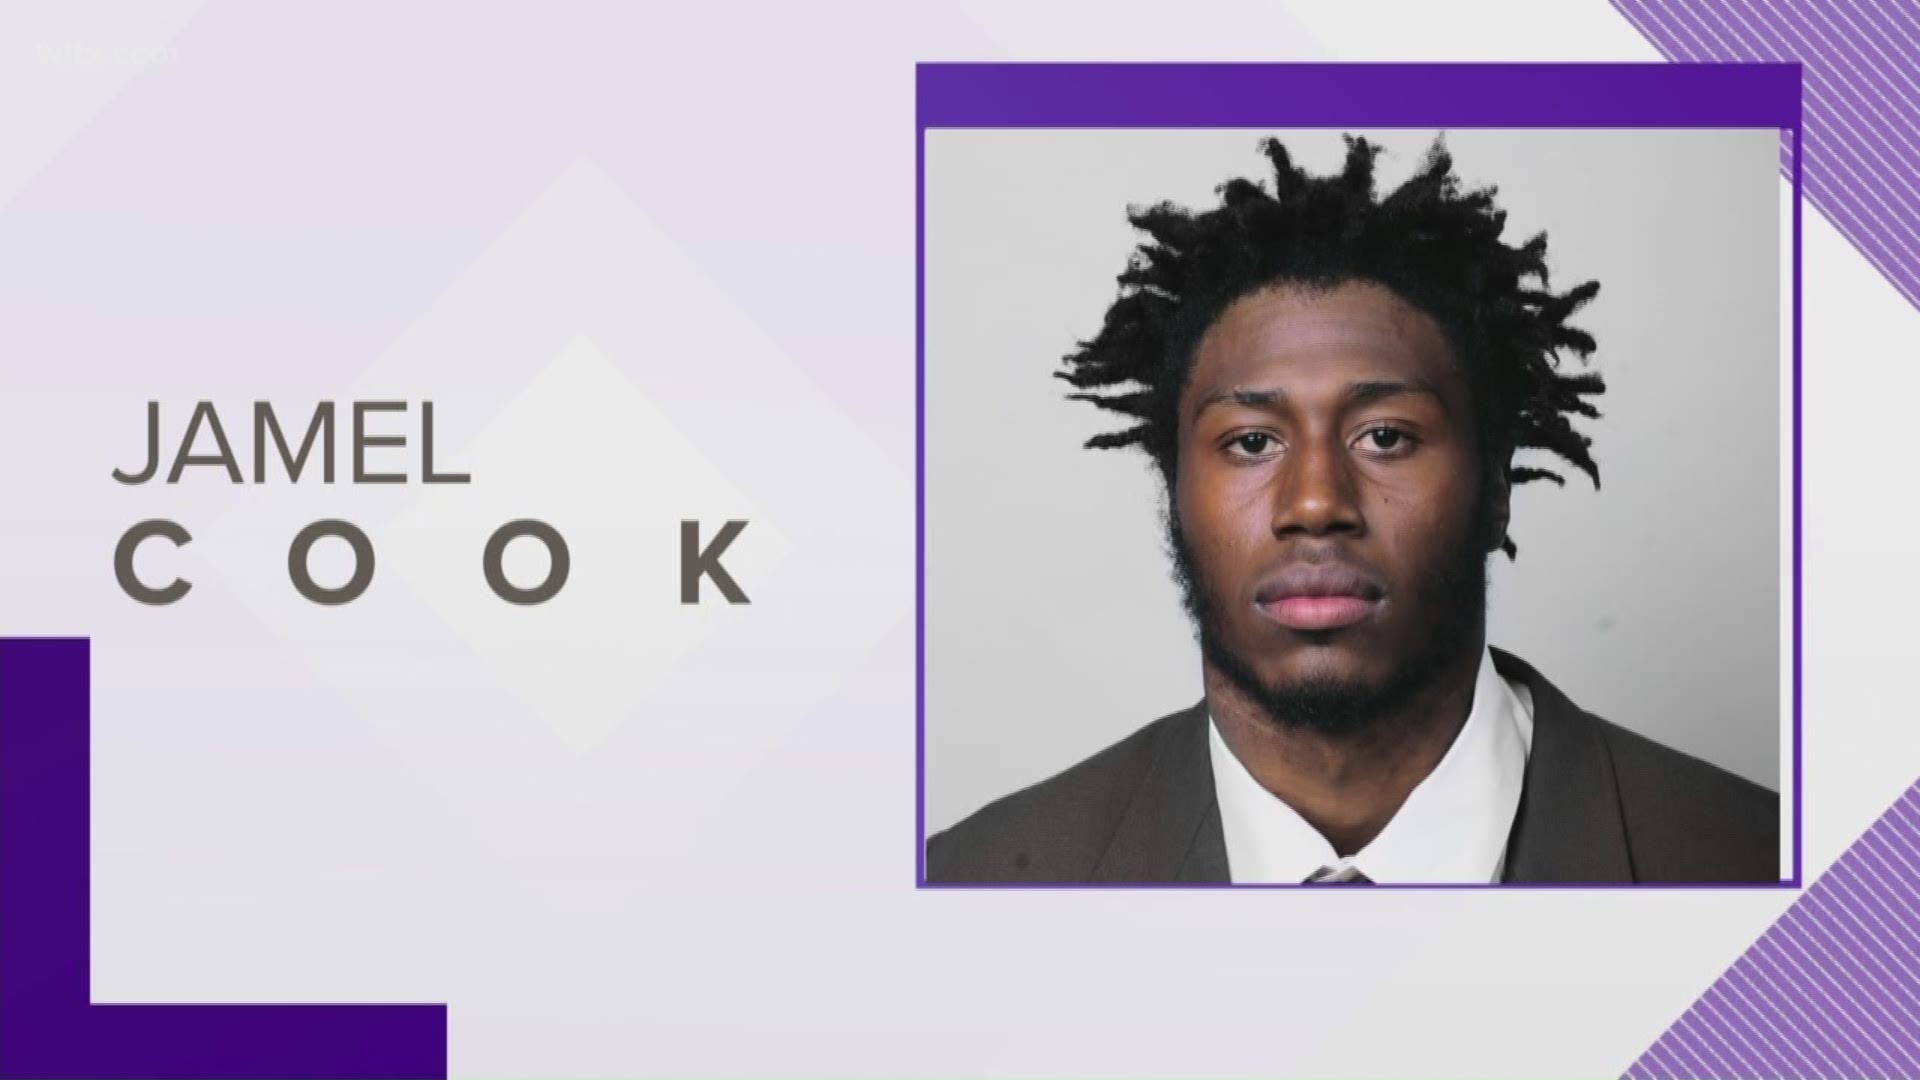 Jamel Cook, who transferred from Southern Cal to the Gamecocks, has been suspended following a domestic violence arrest.